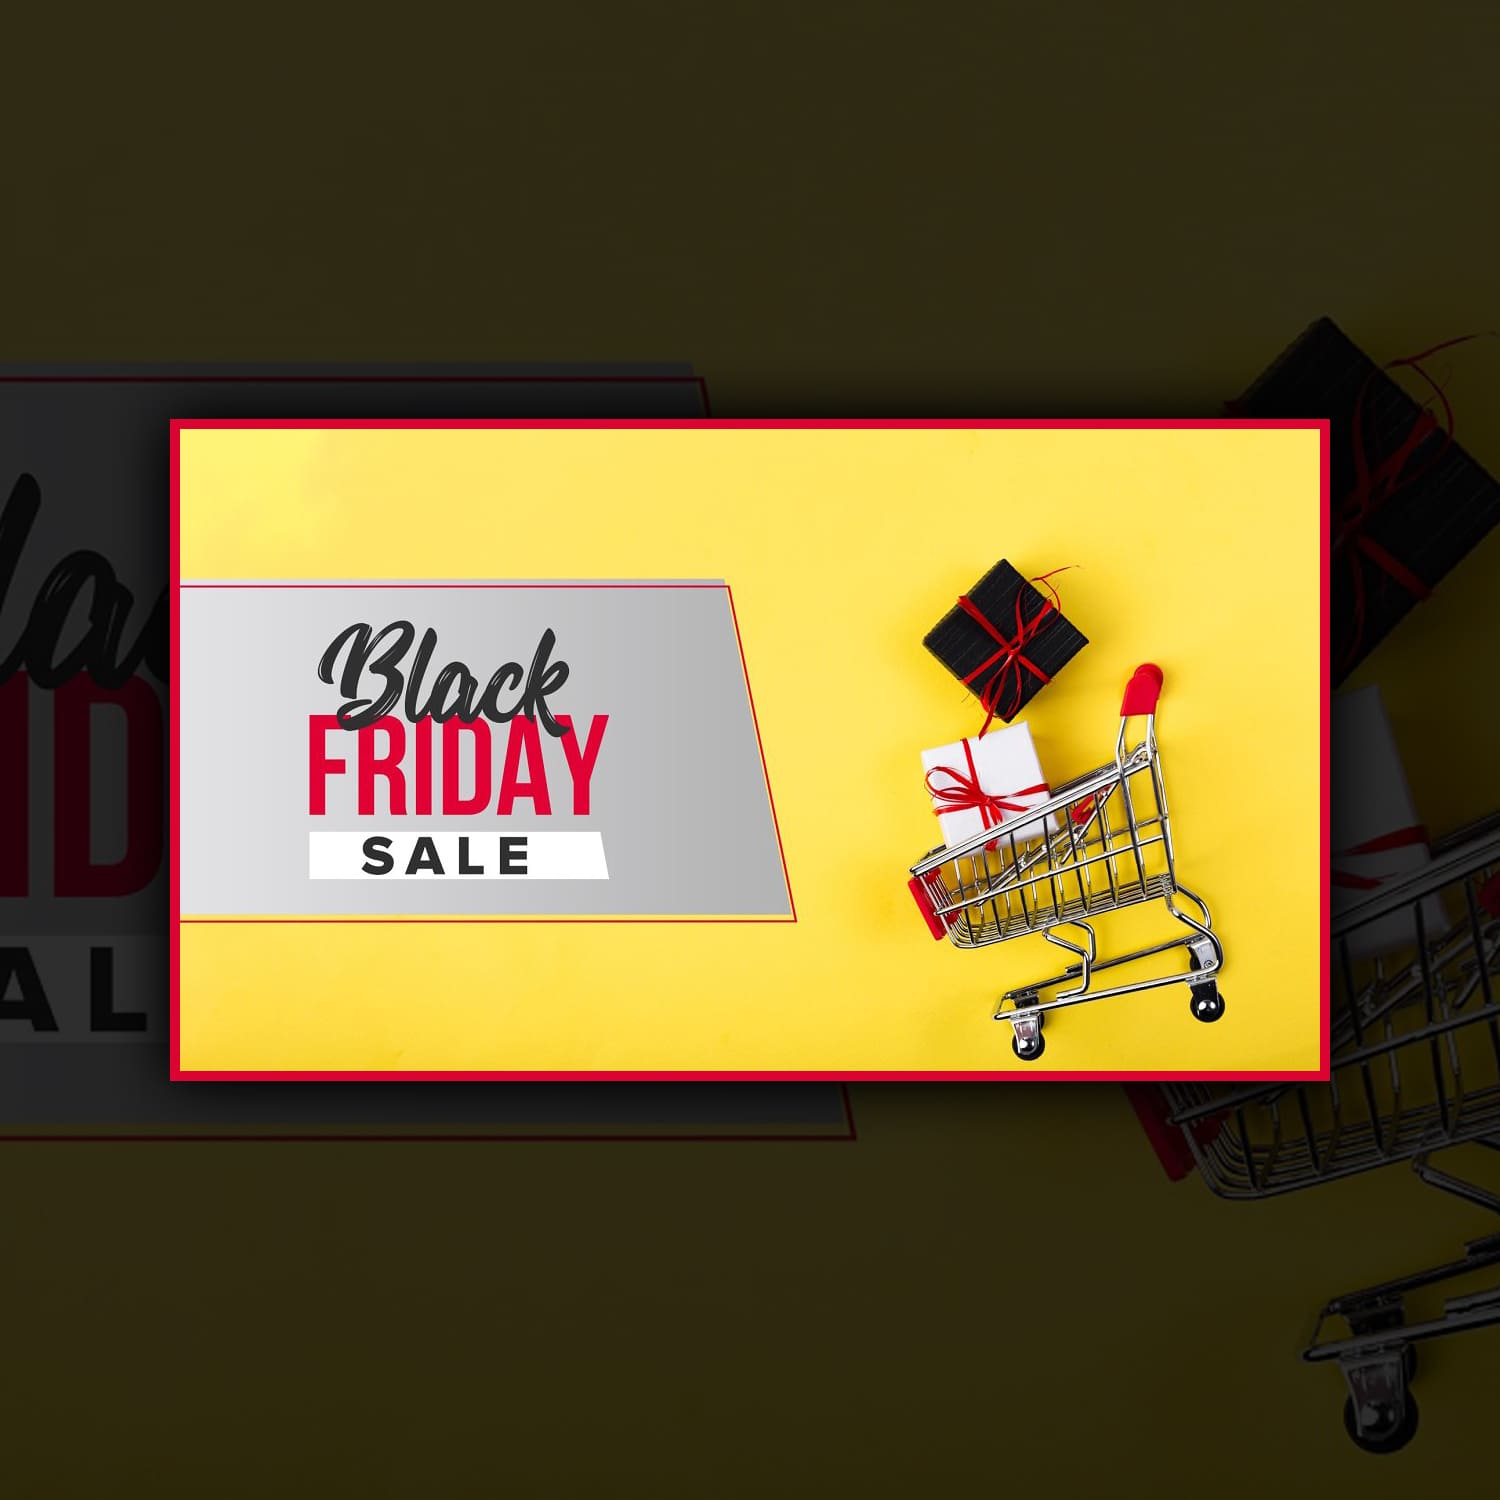 Corporate Black Friday Sale Banner.